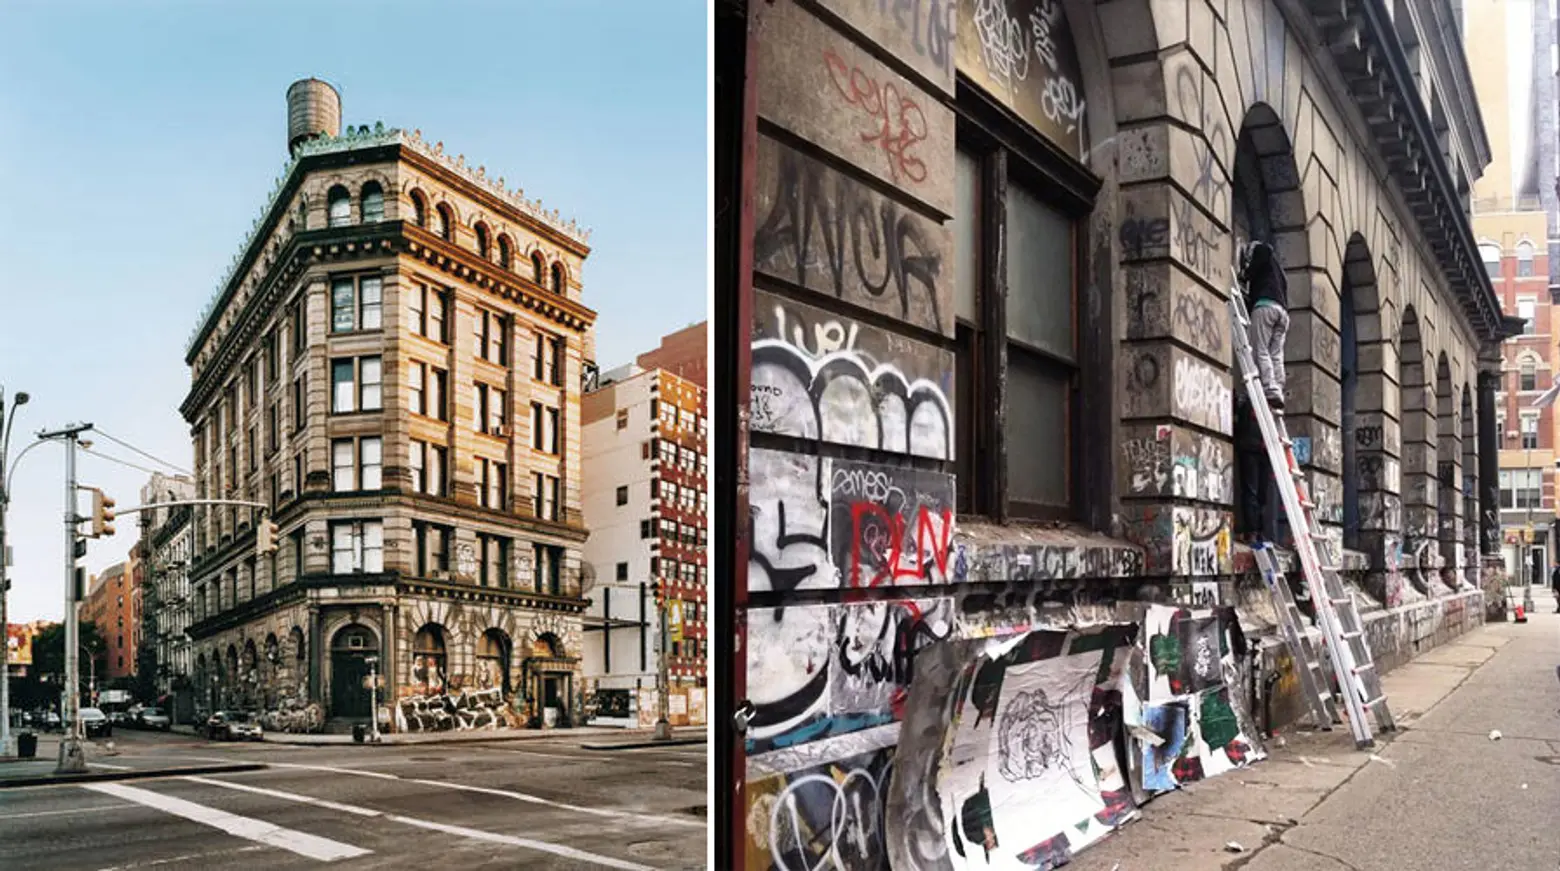 190 Bowery’s New Tenant Plans to Keep Iconic Graffiti on the Facade